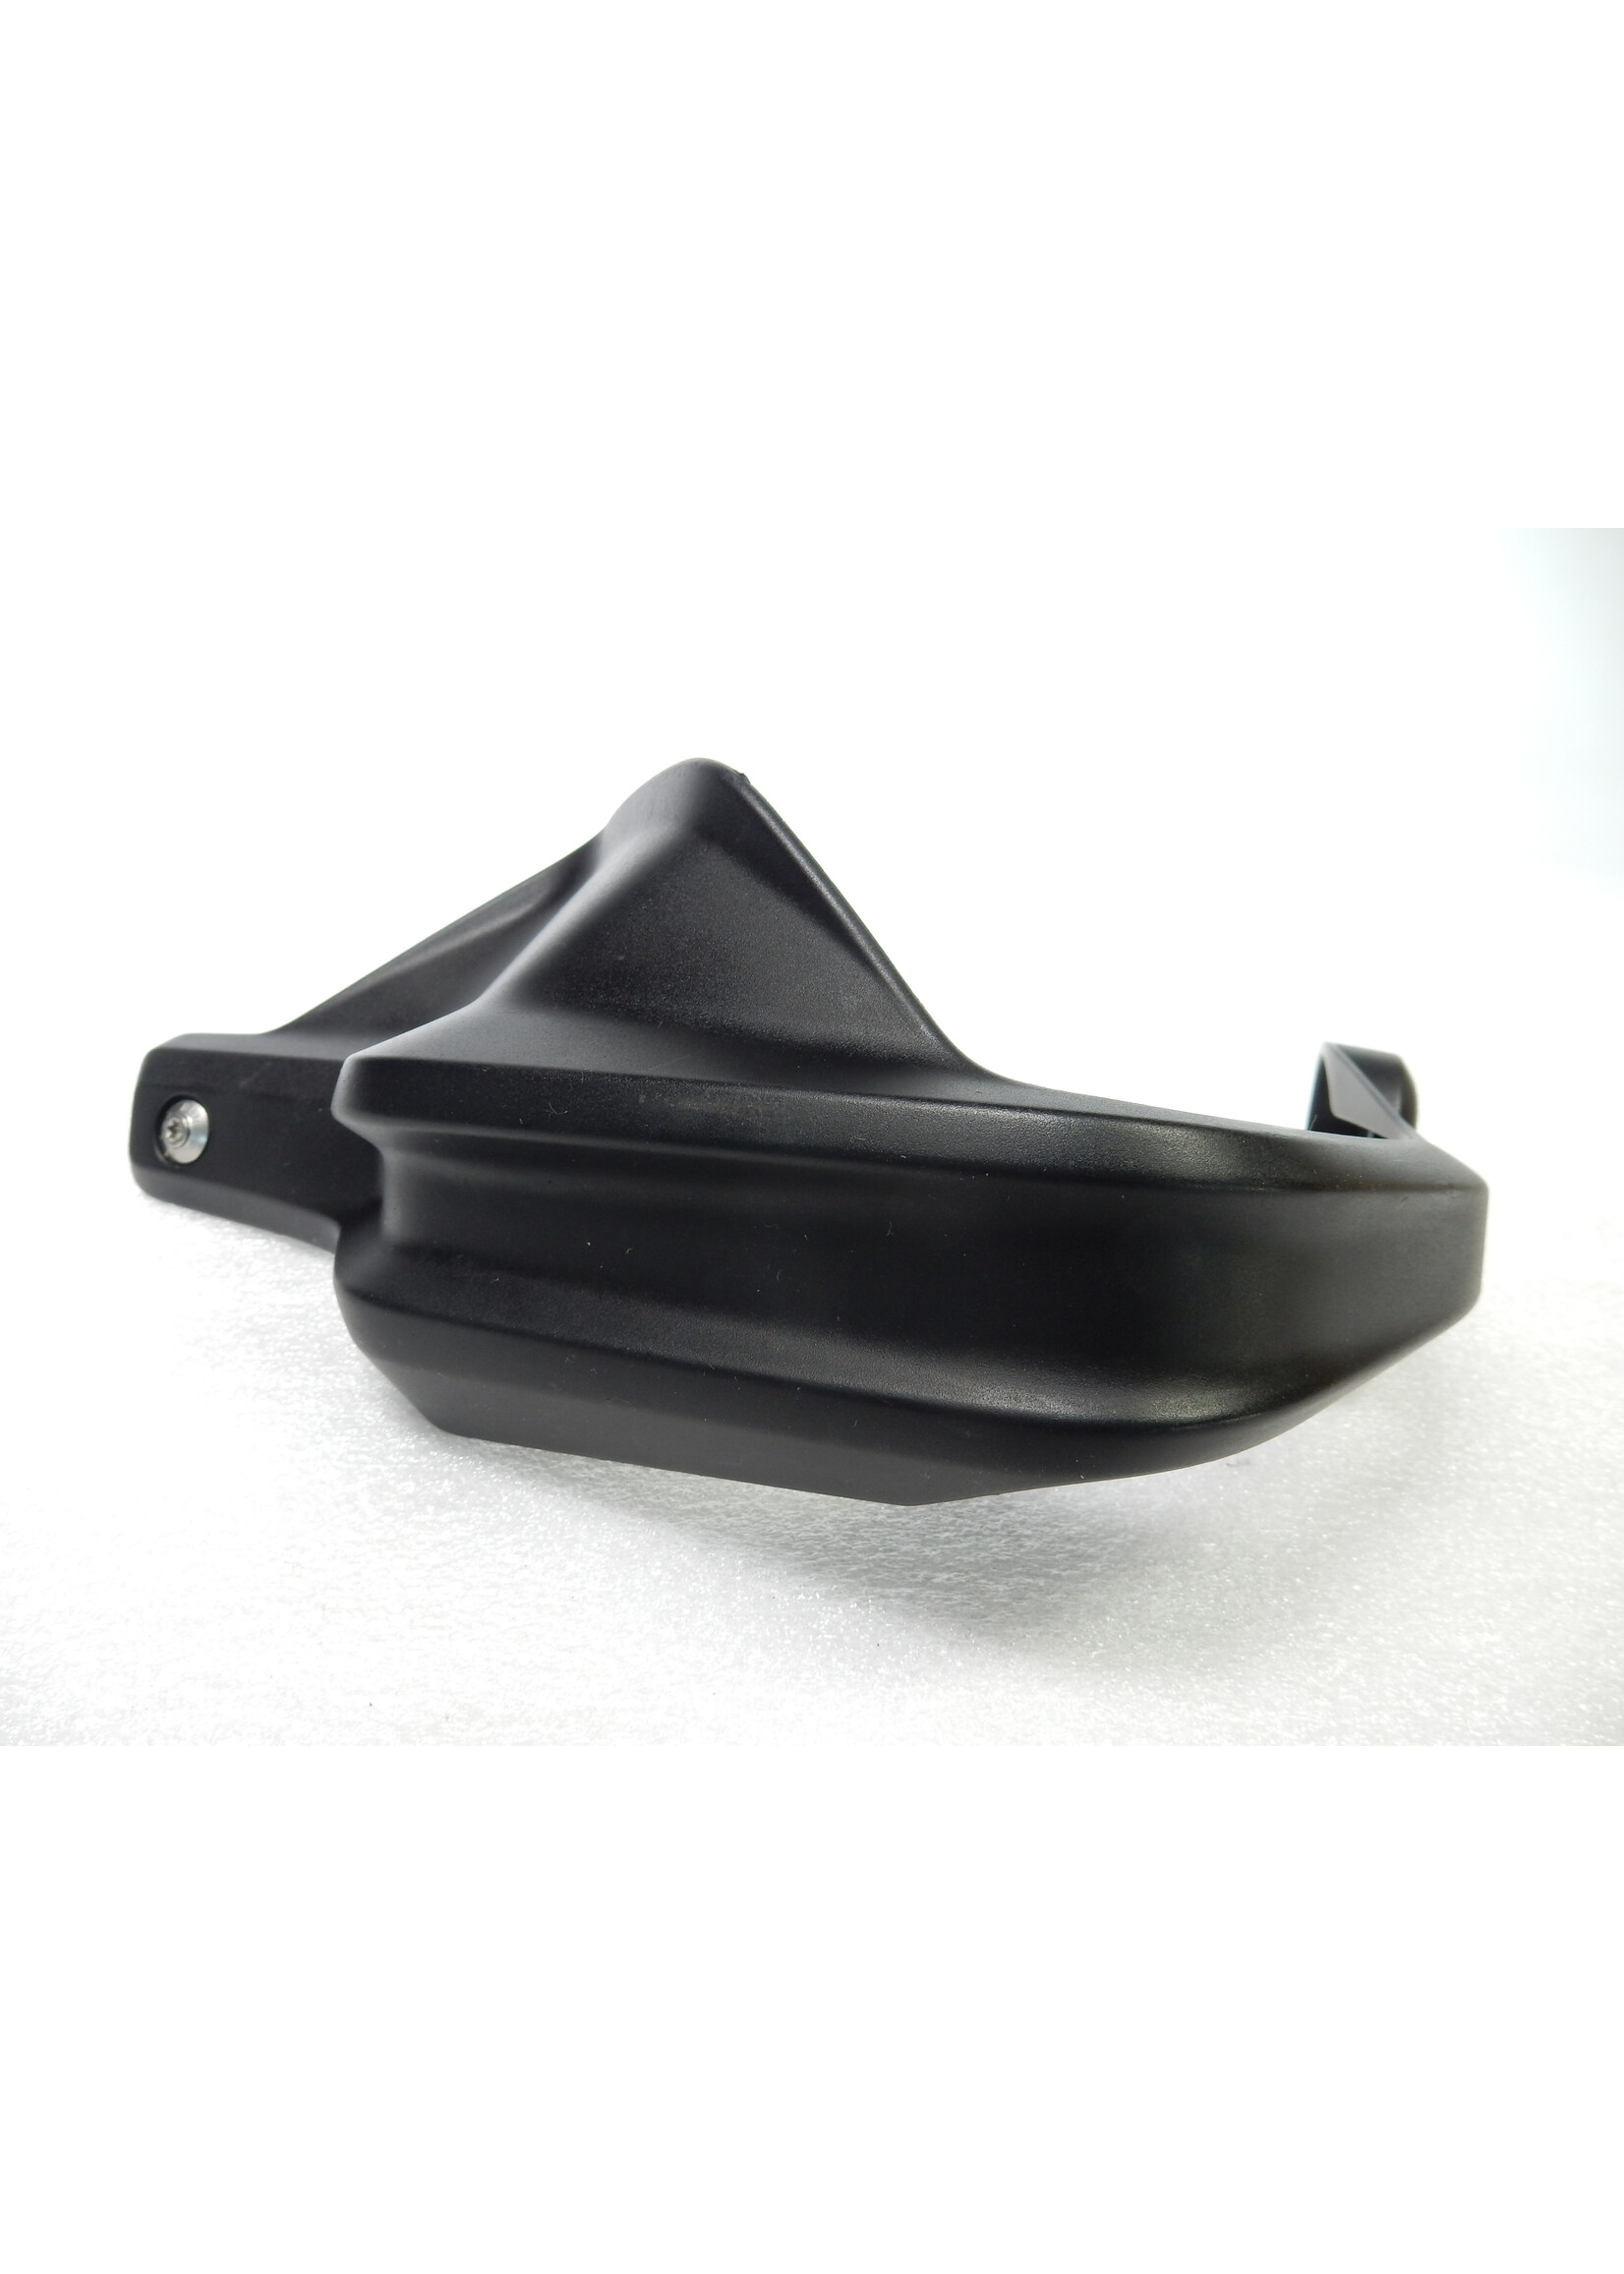 BMW BMW F 750 GS Hand protector left / 32718563803